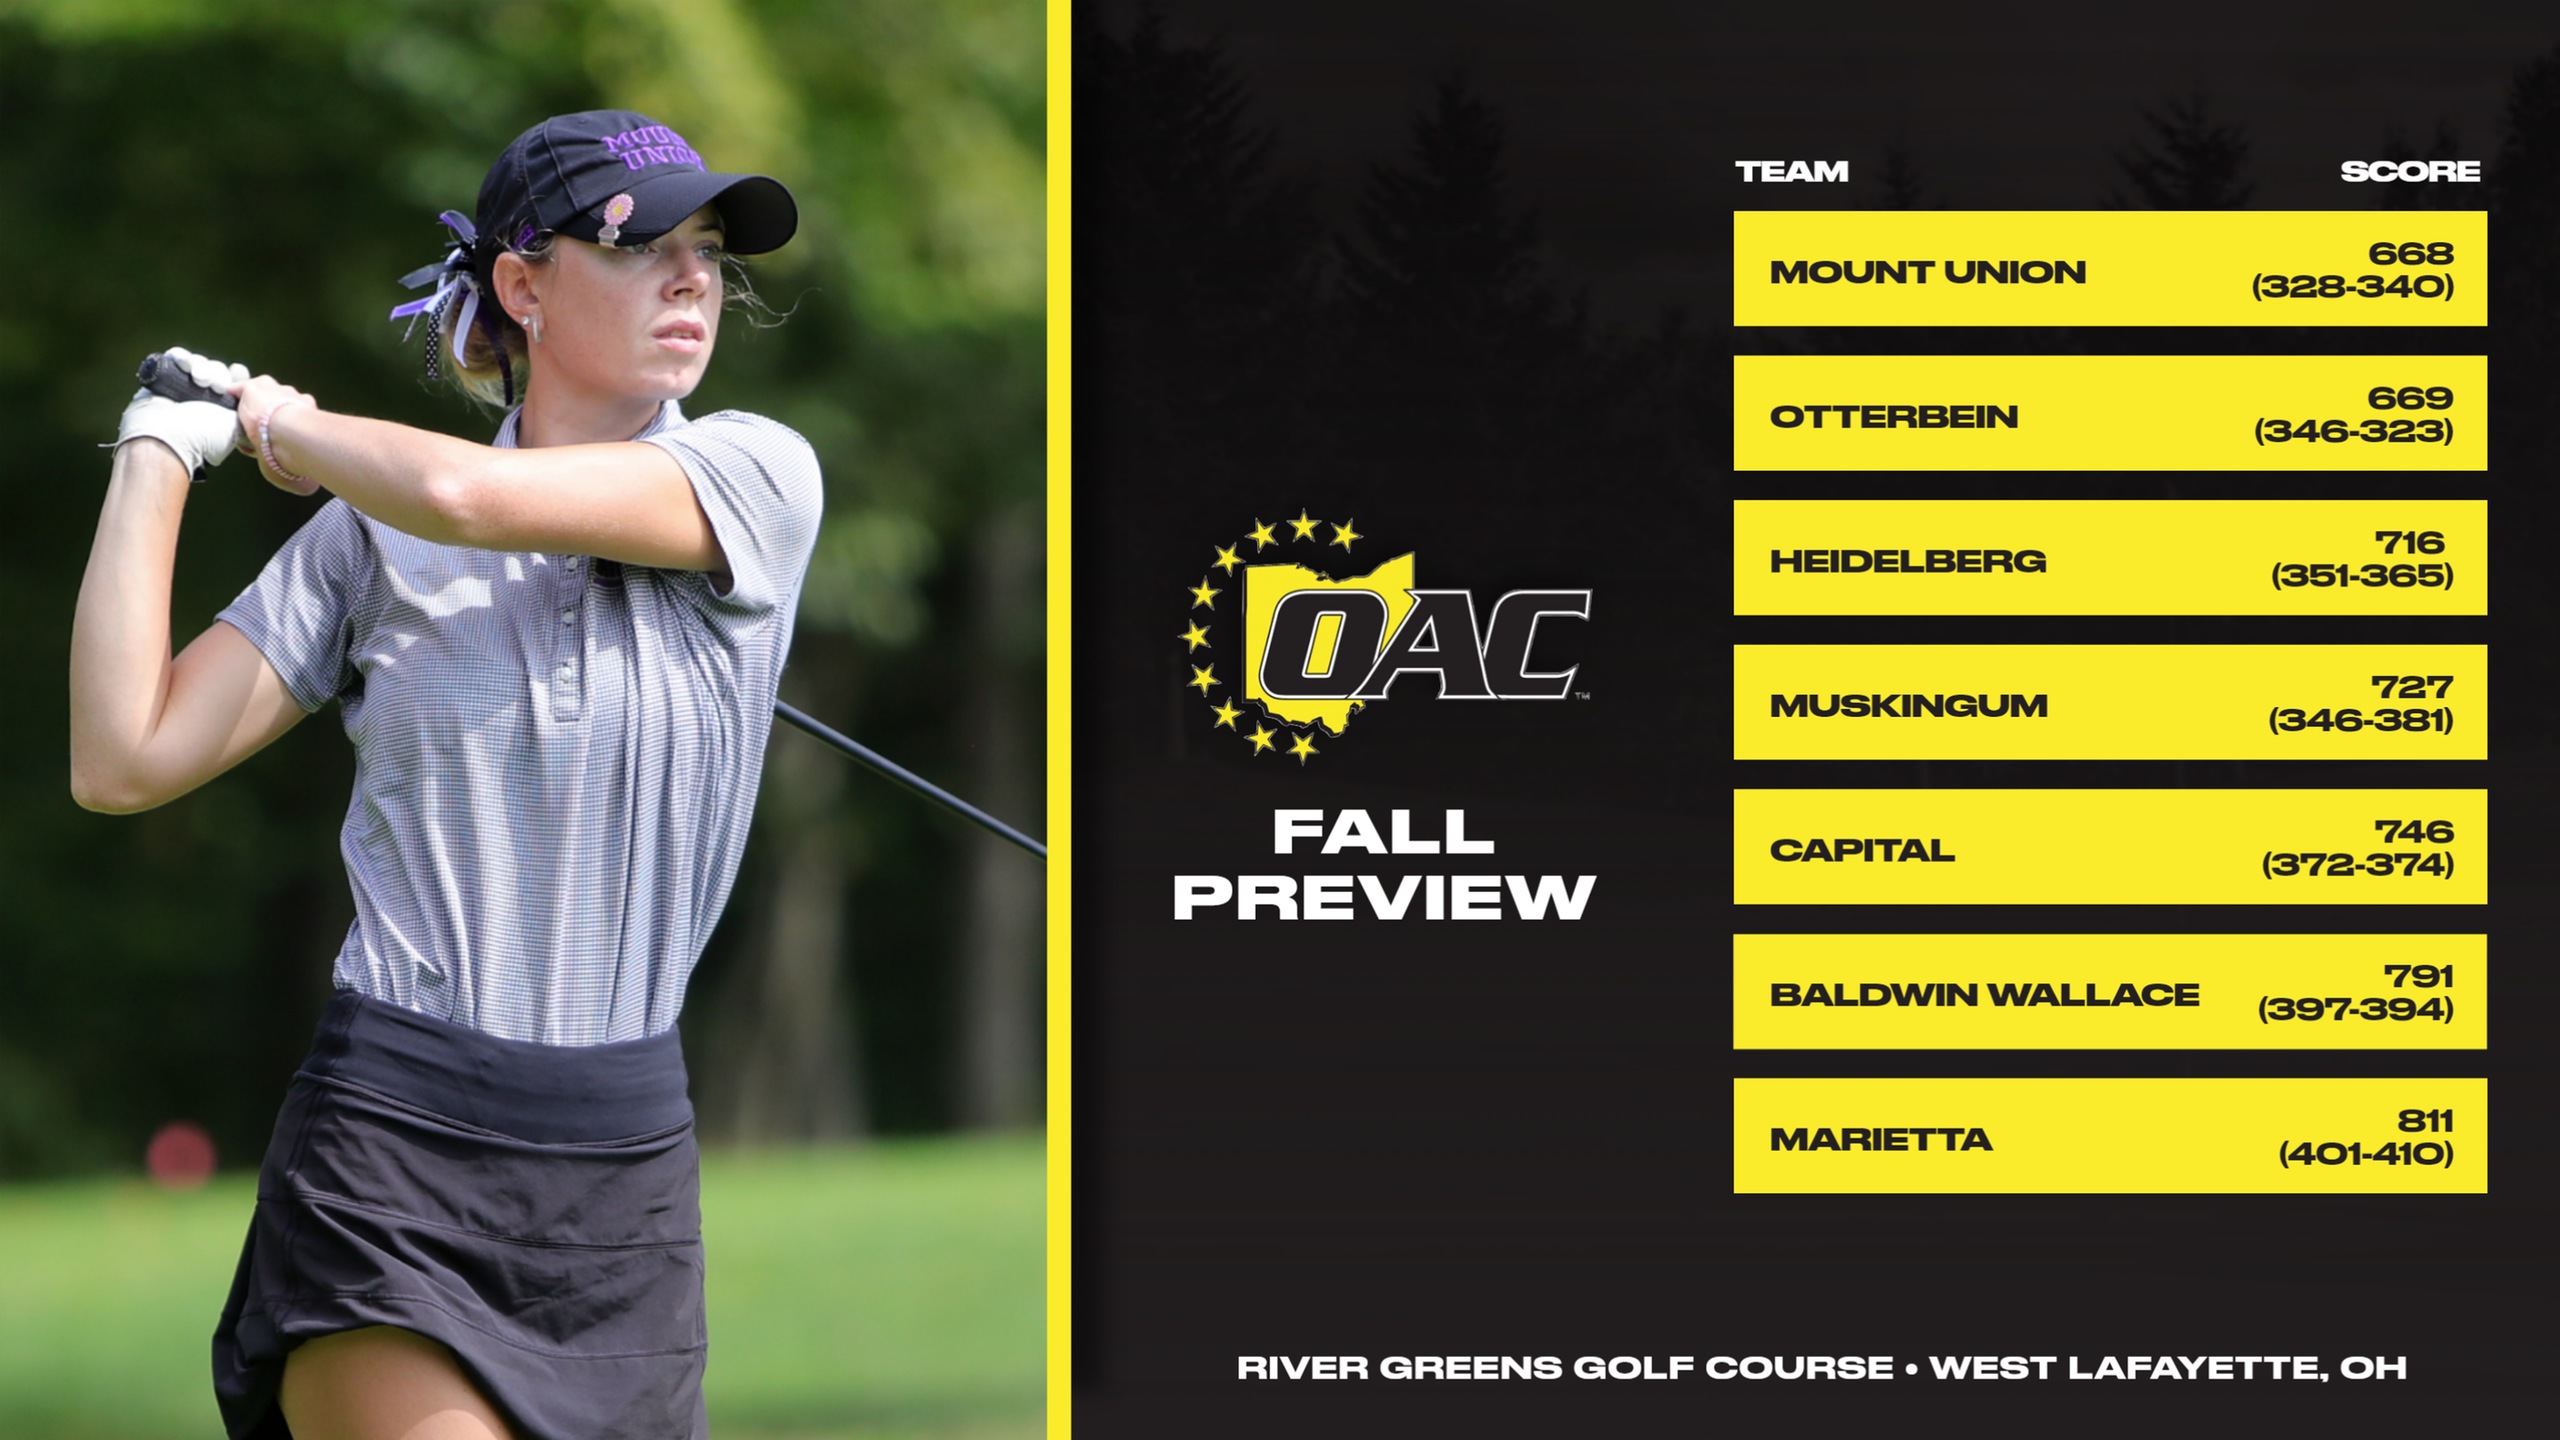 Mount Union Women's Golf Finishes First at OAC Fall Preview